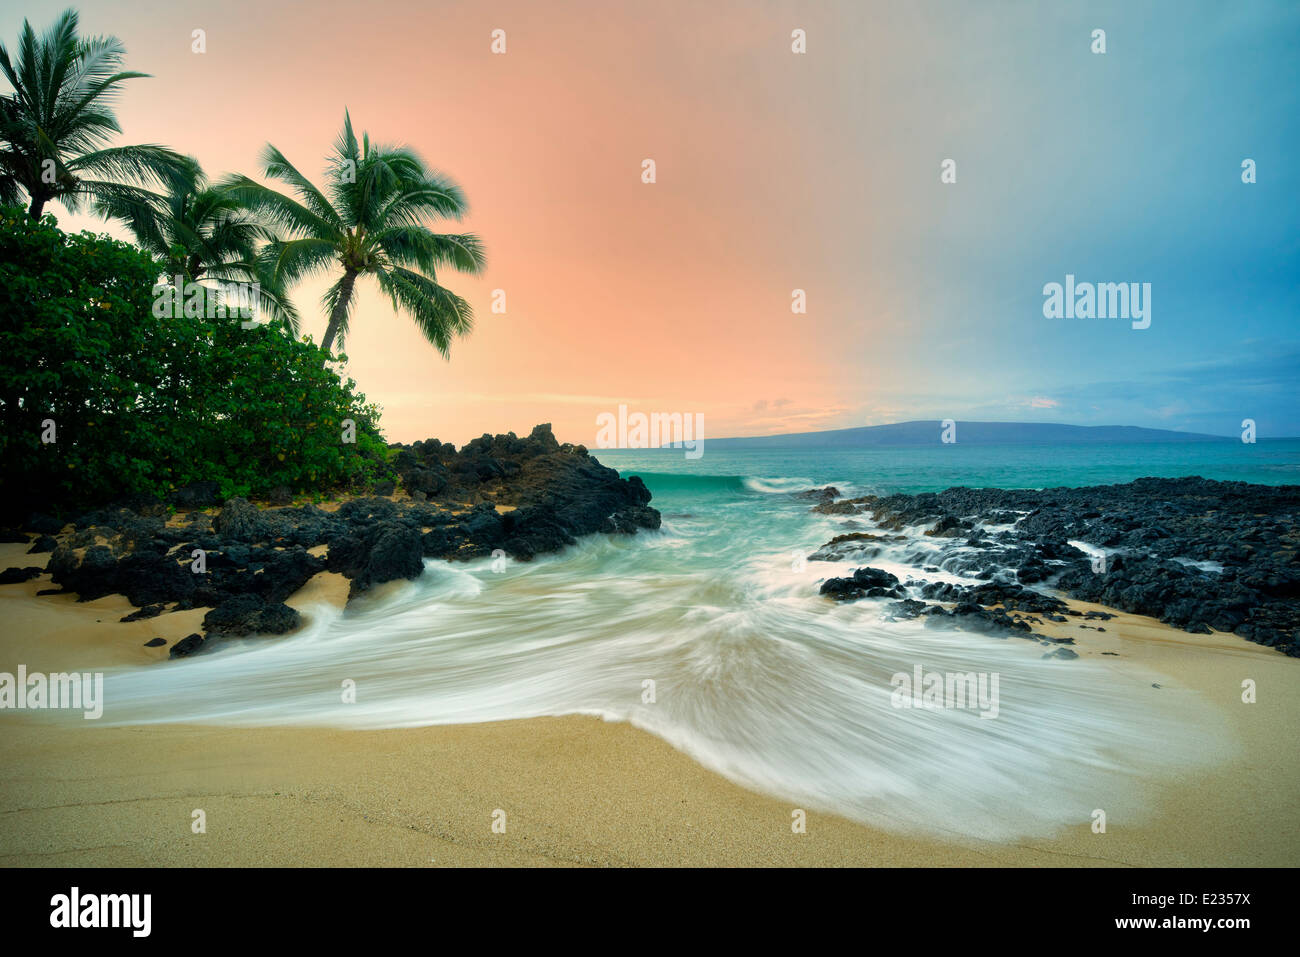 Secluded beach with palm trees and sunrise. Maui, Hawaii Stock Photo